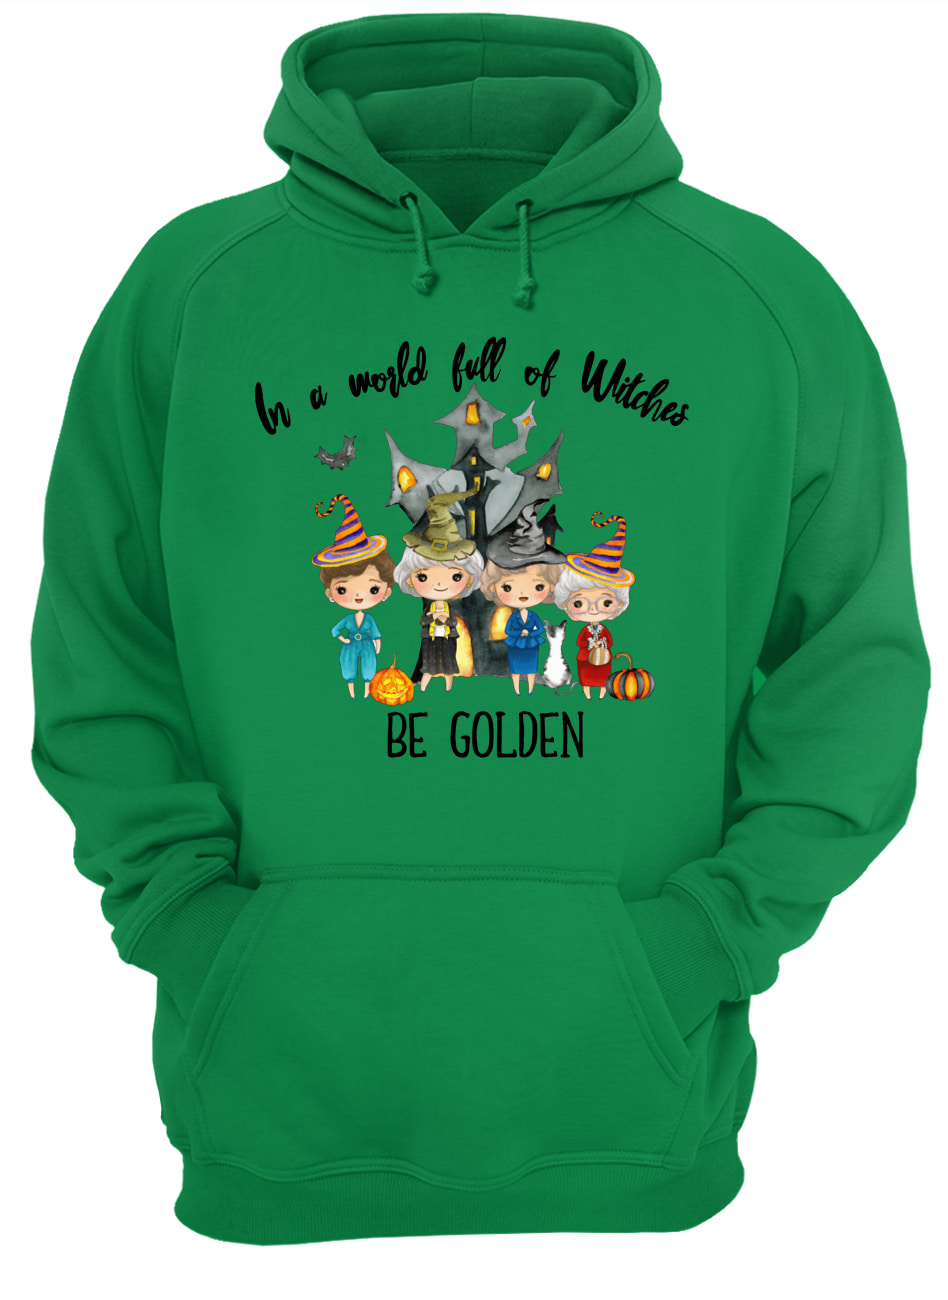 The golden girls in a world full of witches be golden hoodie